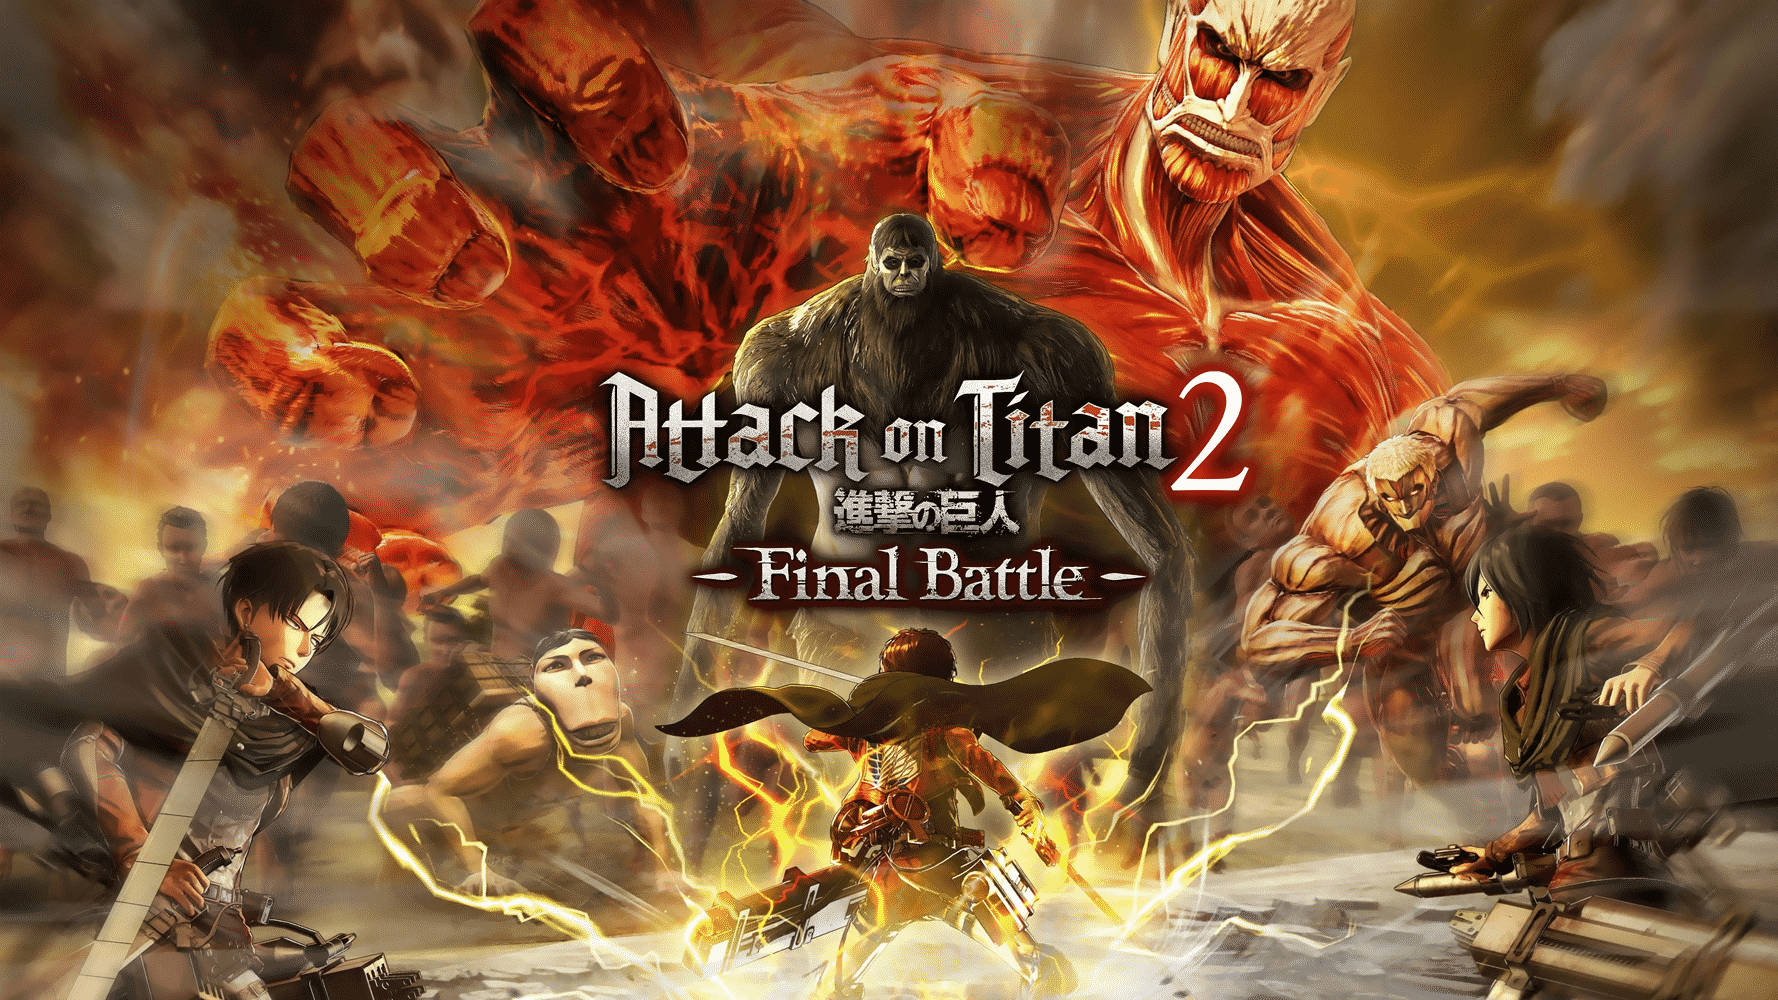 Attack on Titan 2 Final Battle Xbox One Version Full Game Free Download